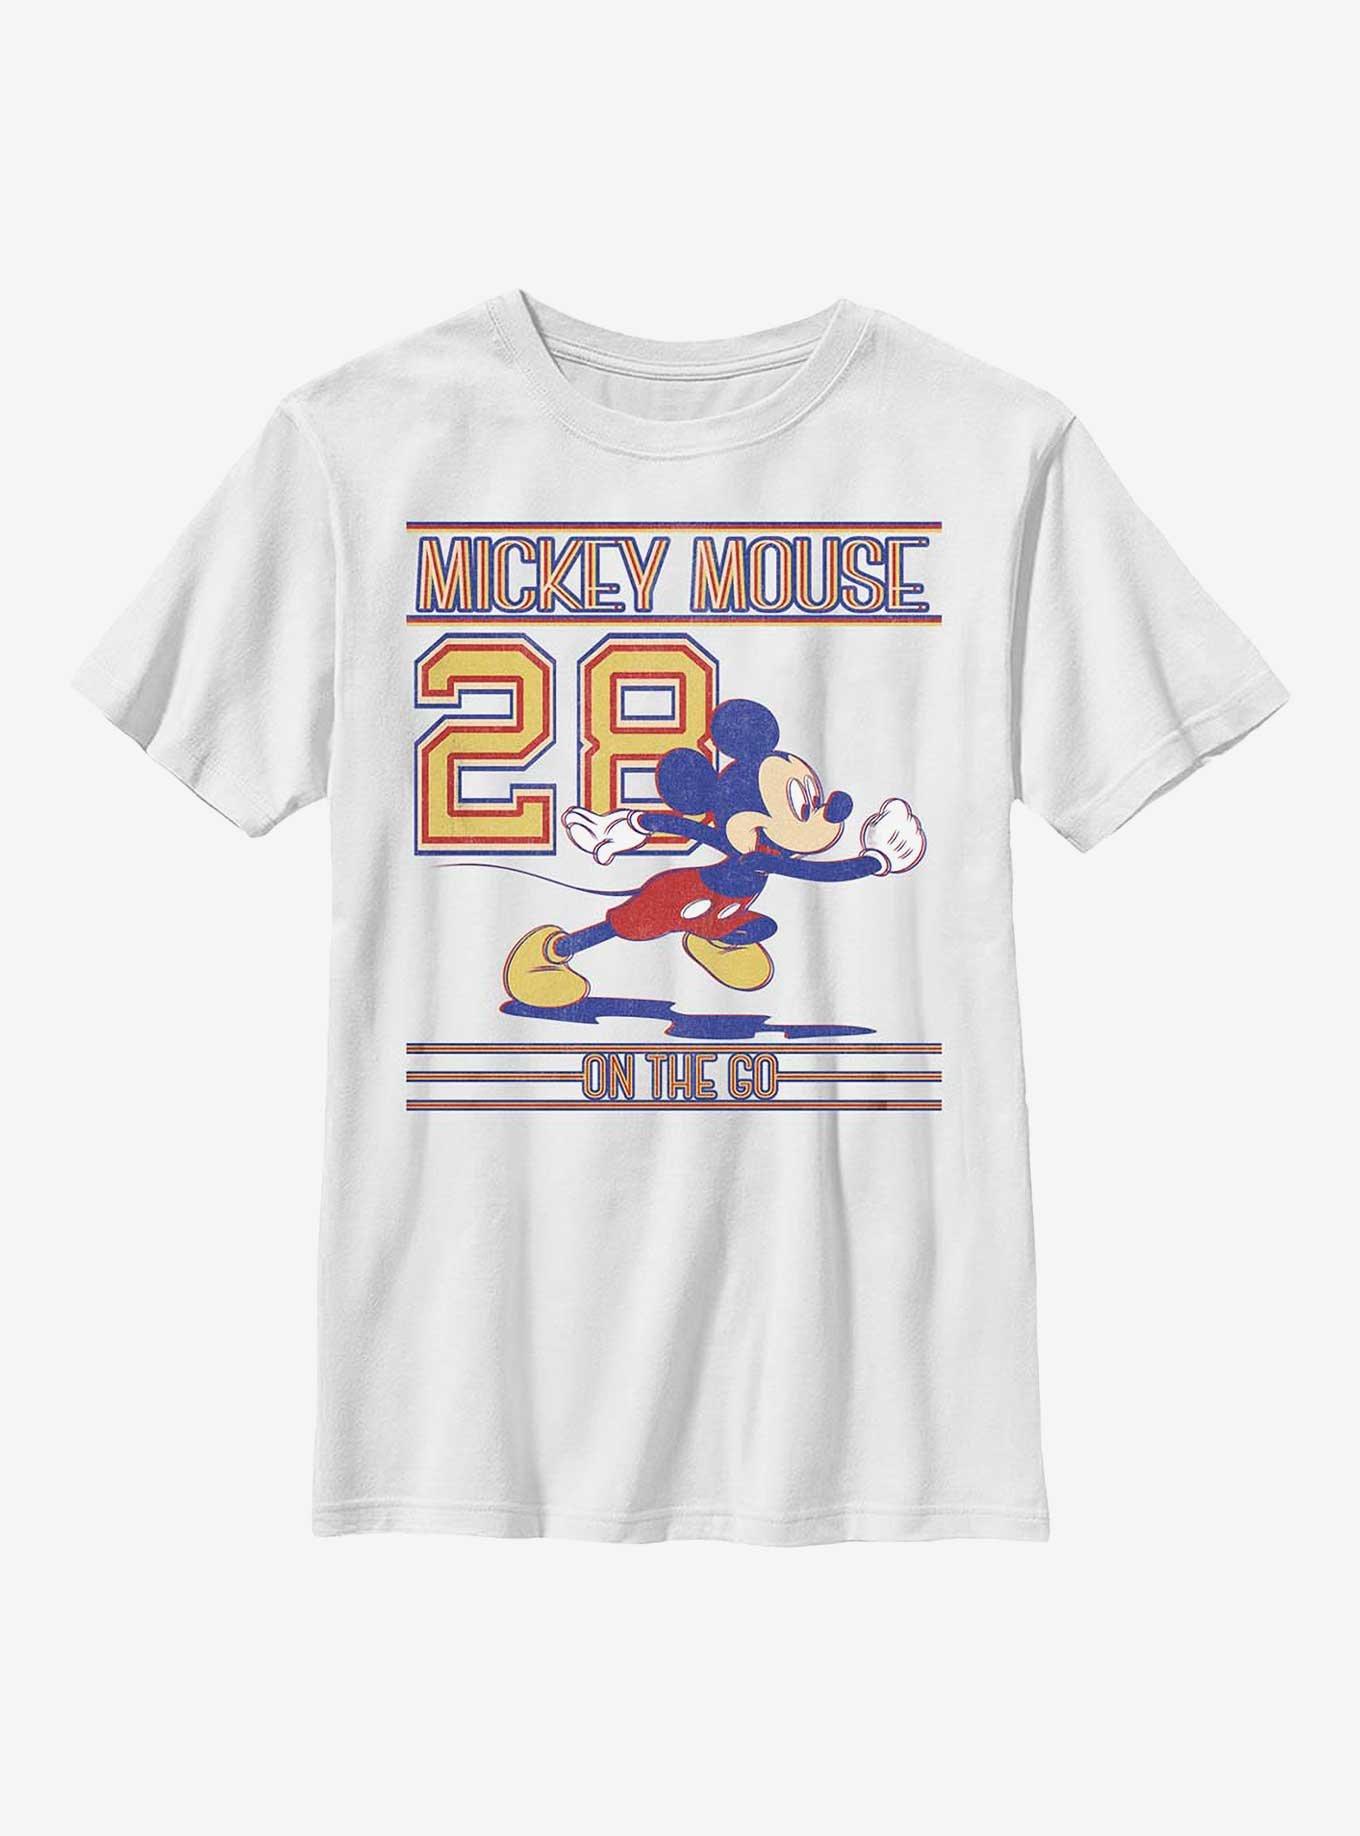 Disney Mickey Mouse Mickey Since 28 Youth T-Shirt, WHITE, hi-res